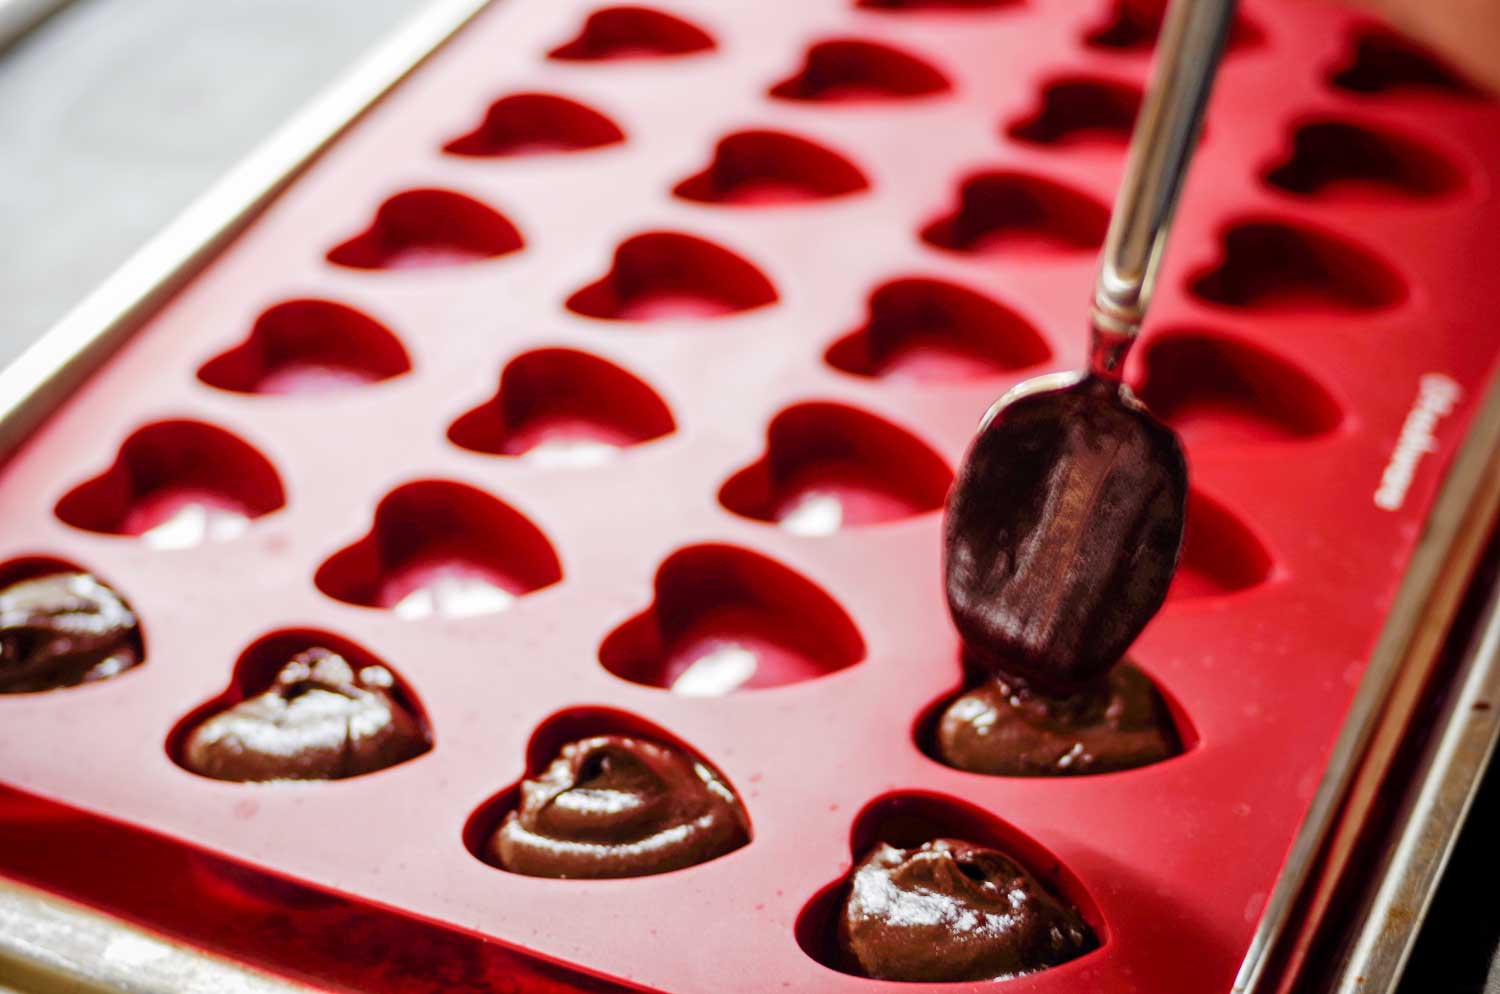 Putting chocolate into heart mold.